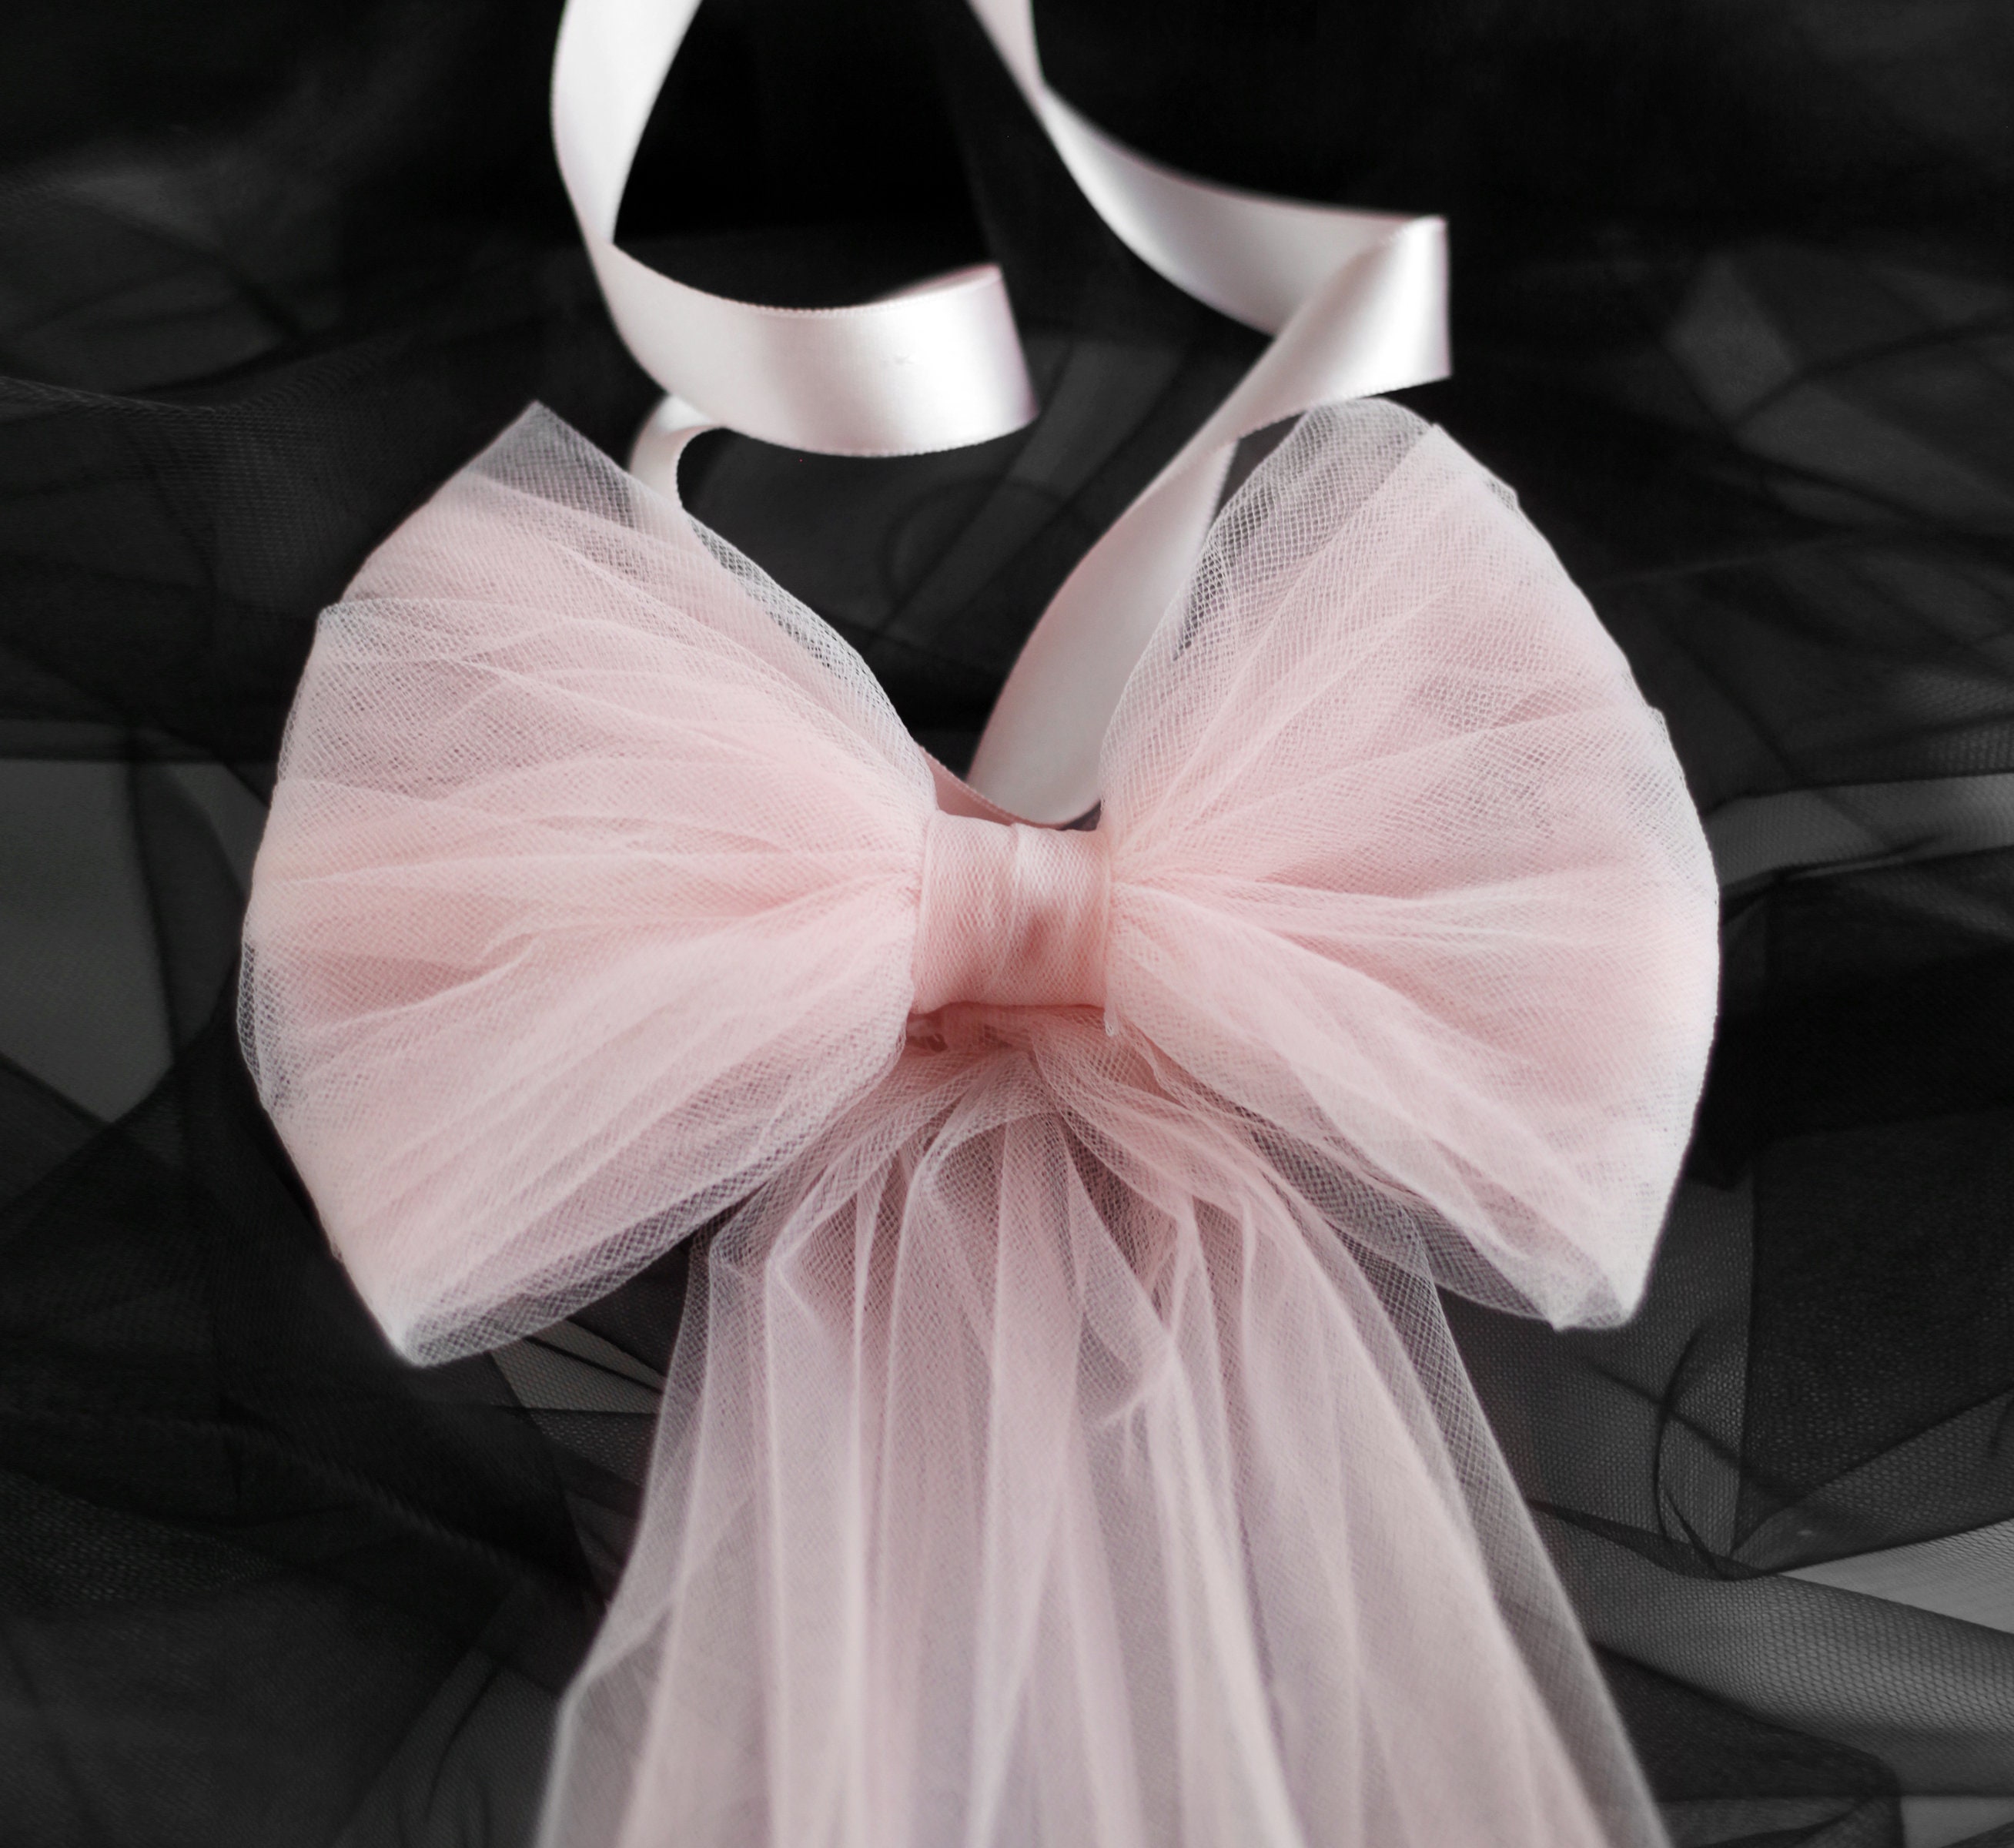 29studio Wedding Dress Bow Detachable Bow Train for Bridal Dress Light Pink Tulle Bow Belt Large Tulle Bow for Dress Fairy Princess Bow Tail